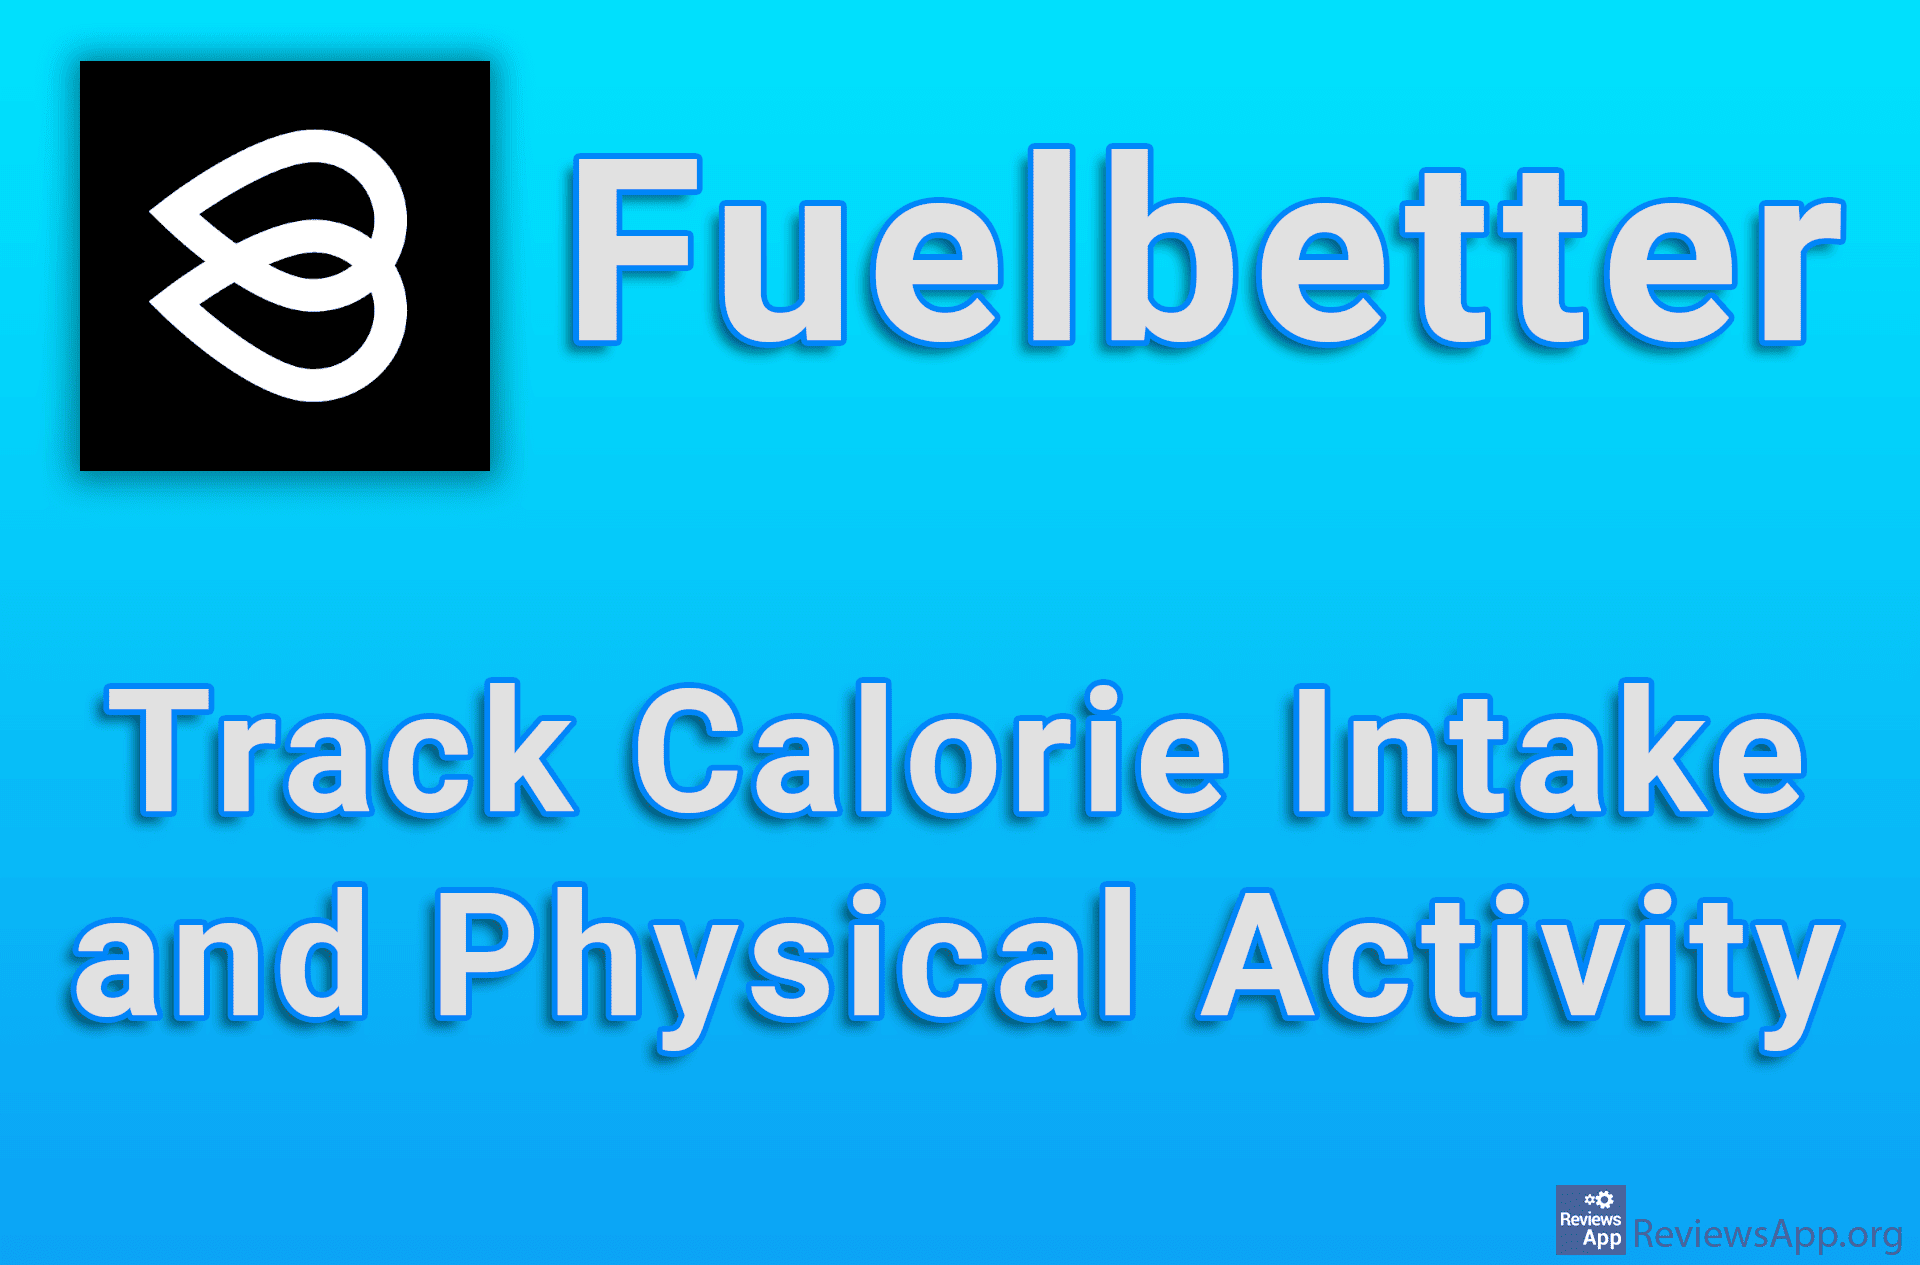 Fuelbetter – Track Calorie Intake and Physical Activity